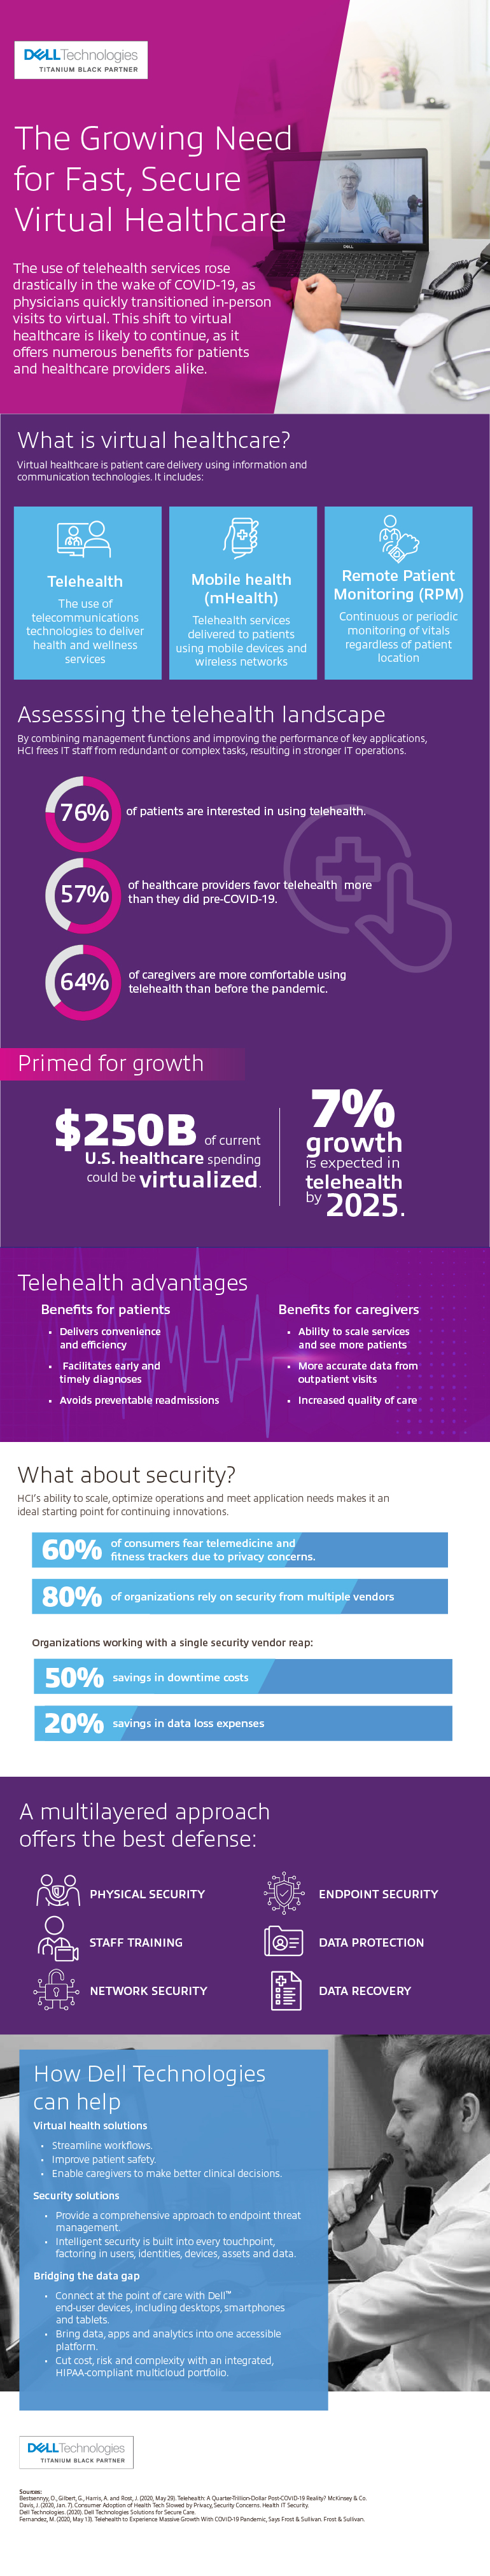 The Growing Need for Fast, Secure Telehealth Infographic described in detail below